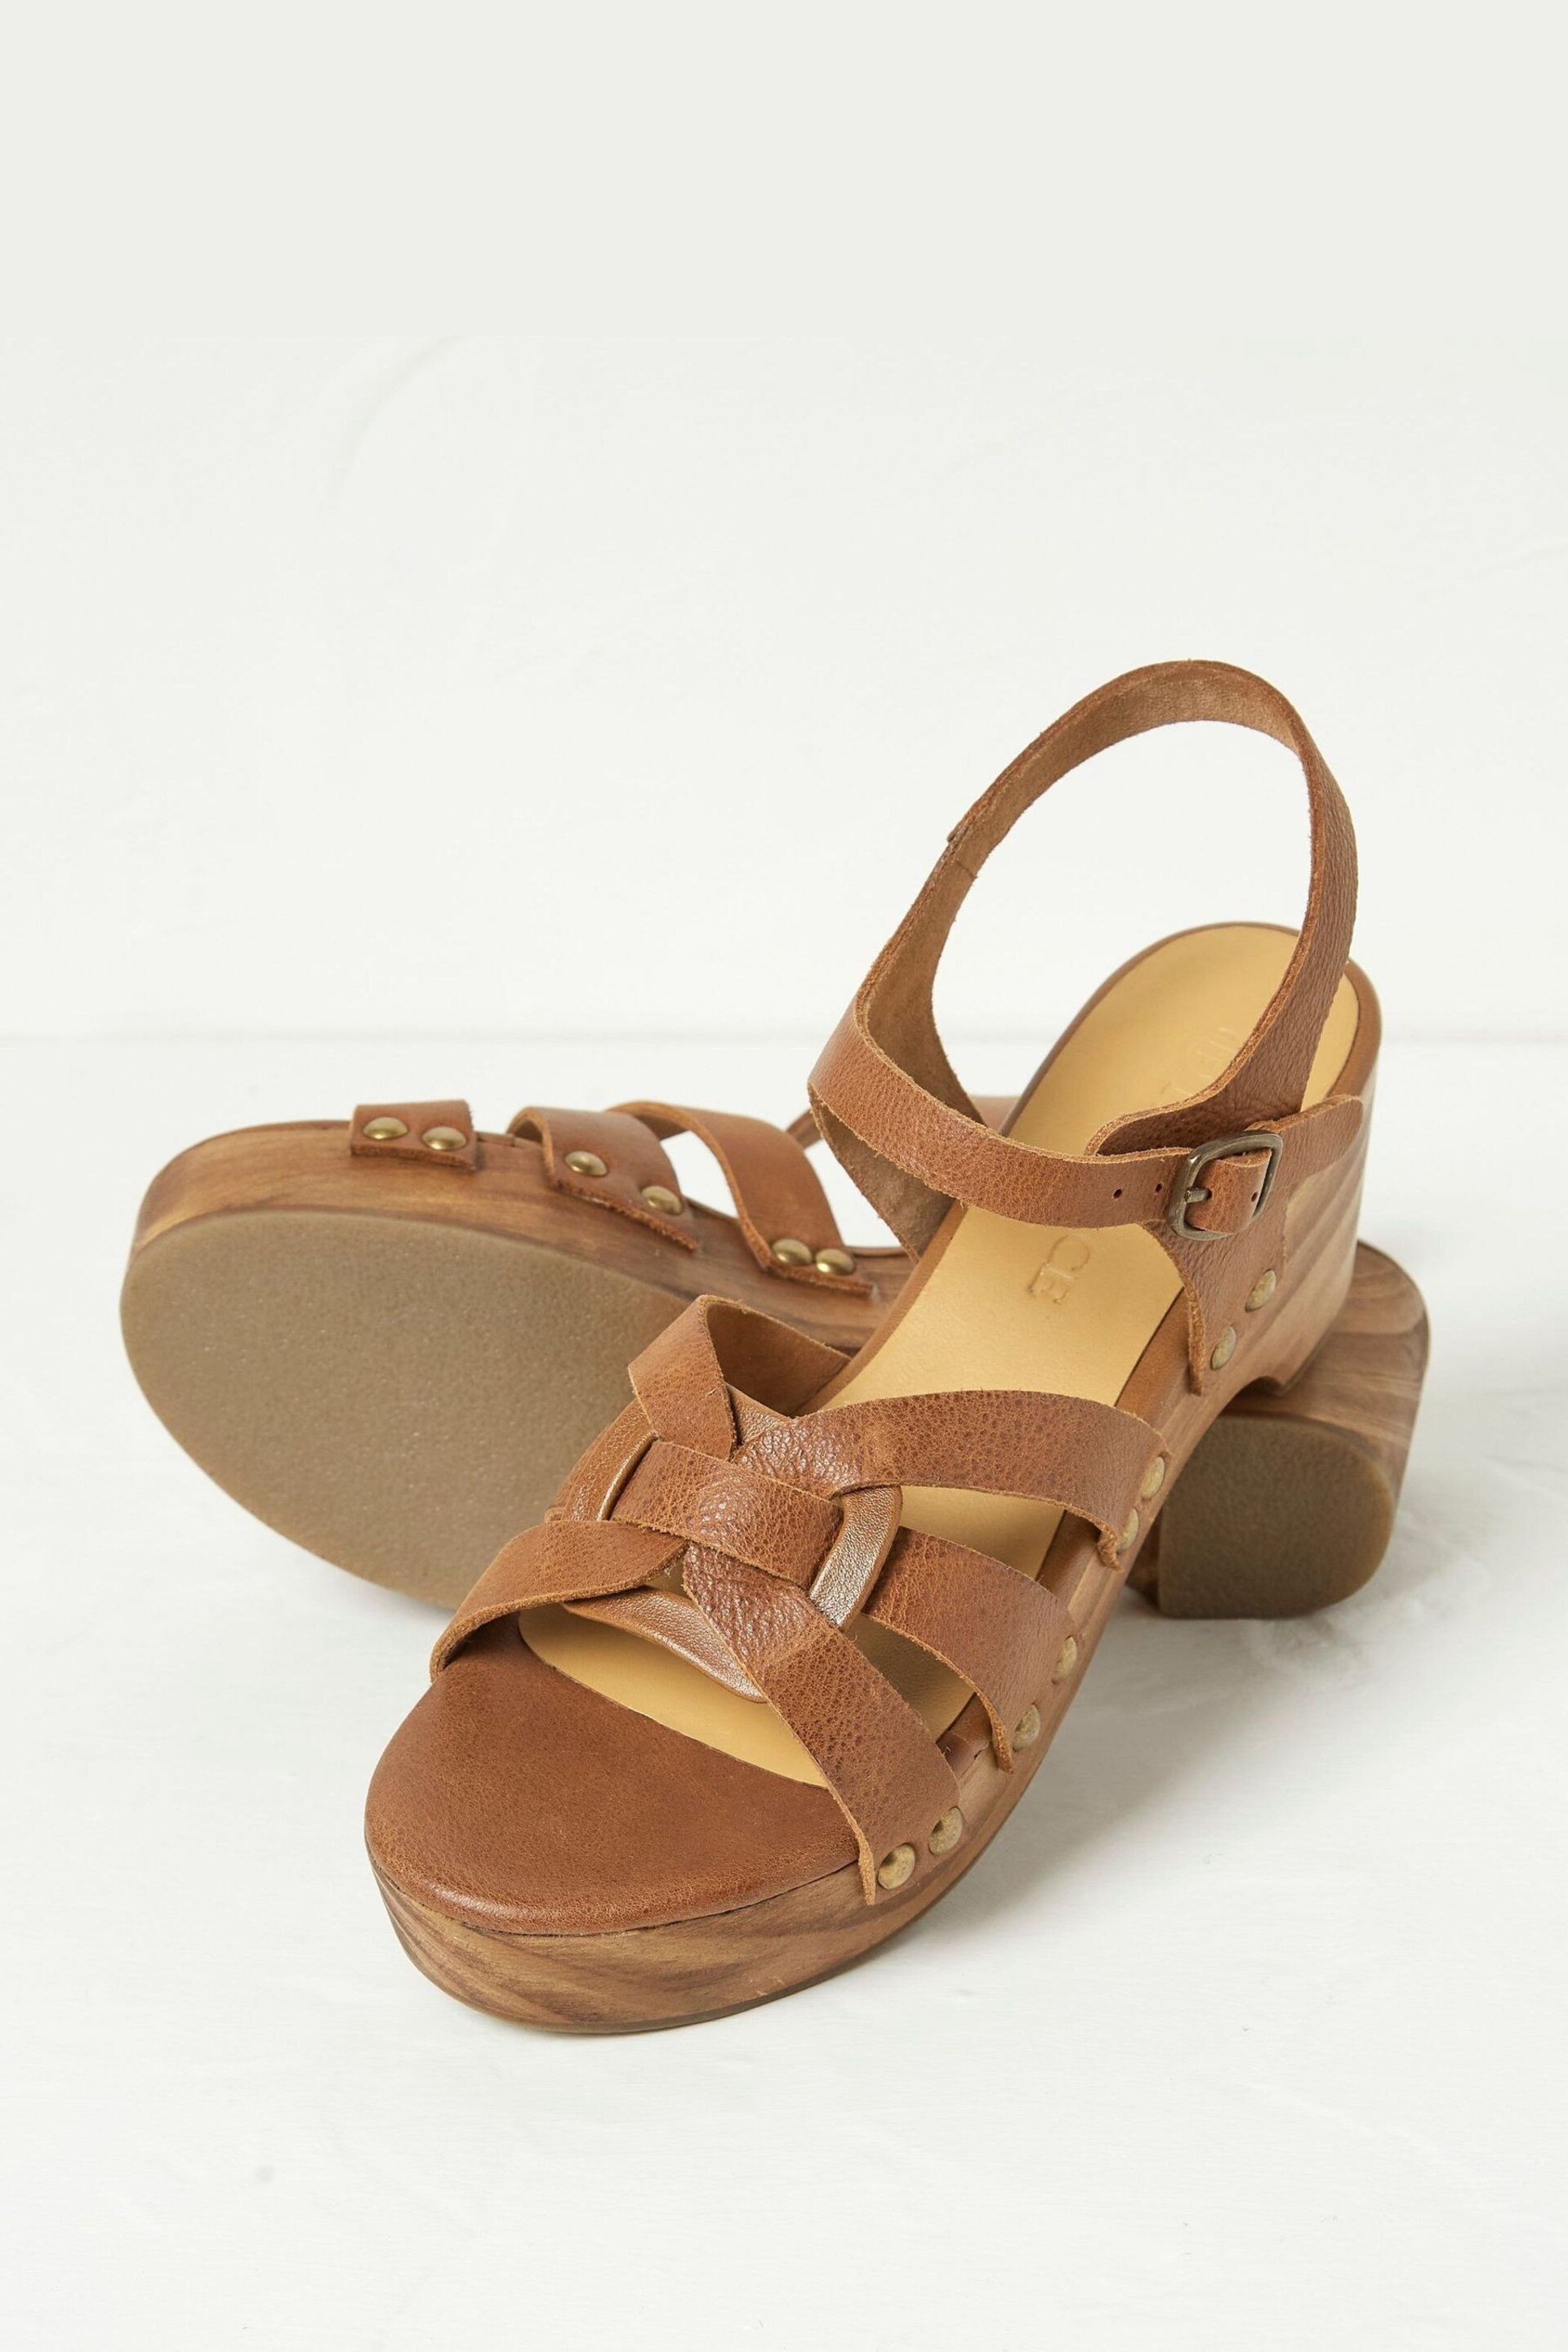 FatFace Brown Mid Heel Clogs - Image 3 of 3